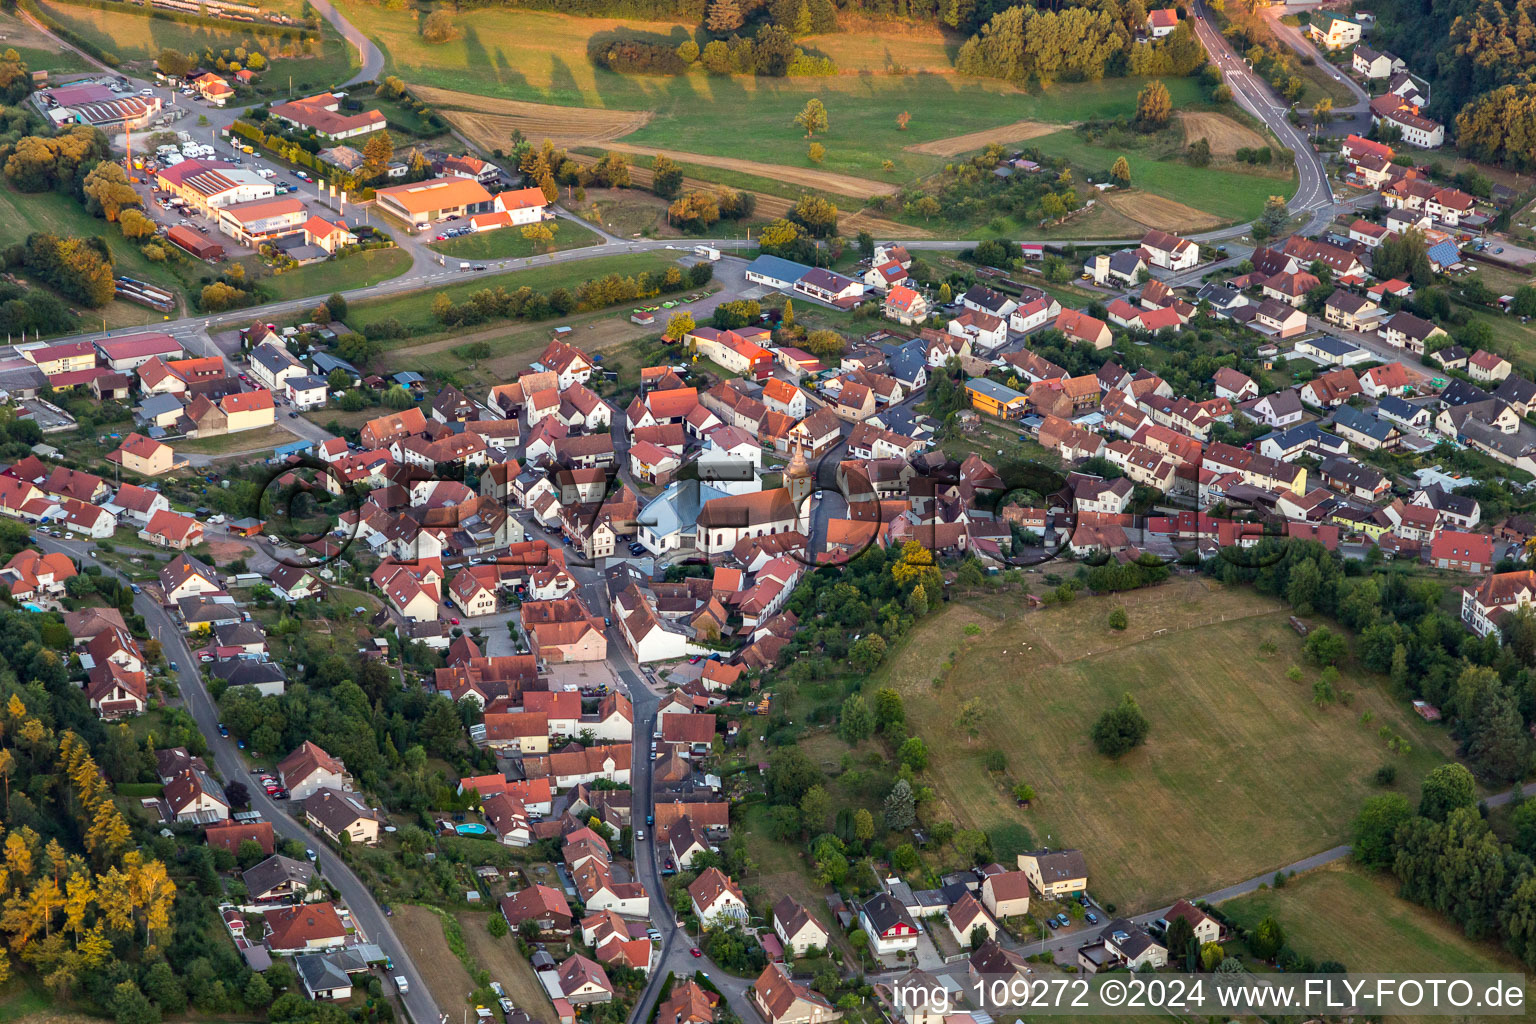 District Gossersweiler in Gossersweiler-Stein in the state Rhineland-Palatinate, Germany from the plane